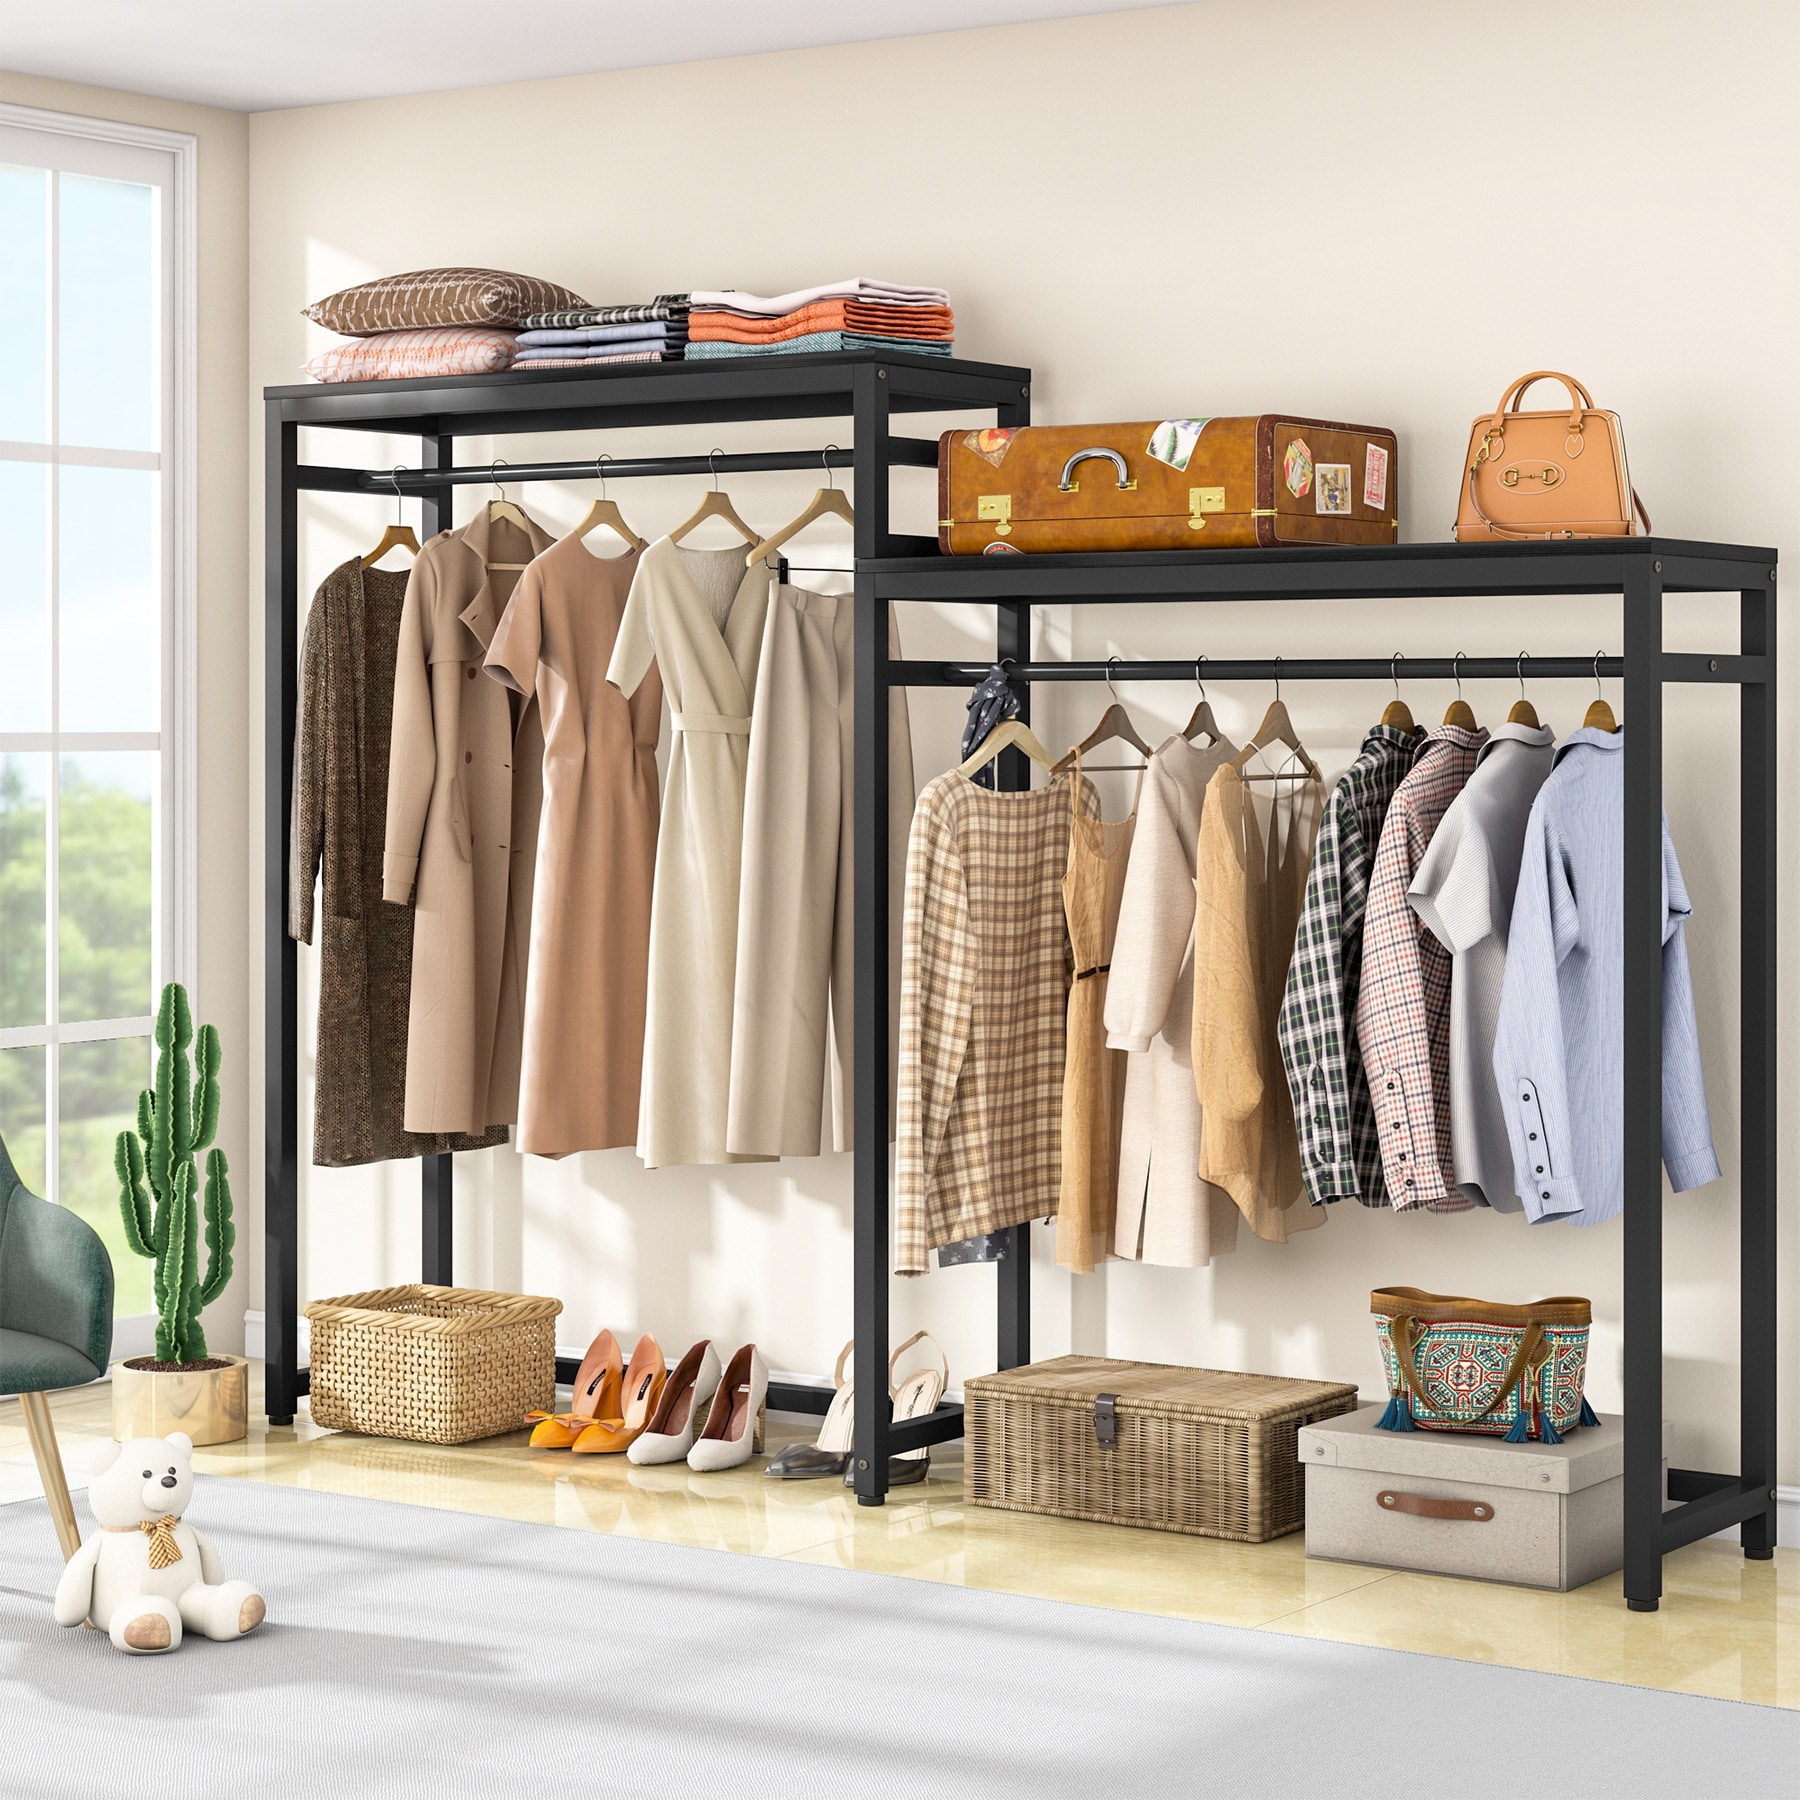 https://ak1.ostkcdn.com/images/products/is/images/direct/aeee90138ec756da02b30dd9df83d6b0ab4d632c/Heavy-Duty-Metal-Clothes-Garment-Racks-with-Storage-Shelves-and-Double-Hanging-Rod%2CFree-Standing-Closet-Organizer.jpg